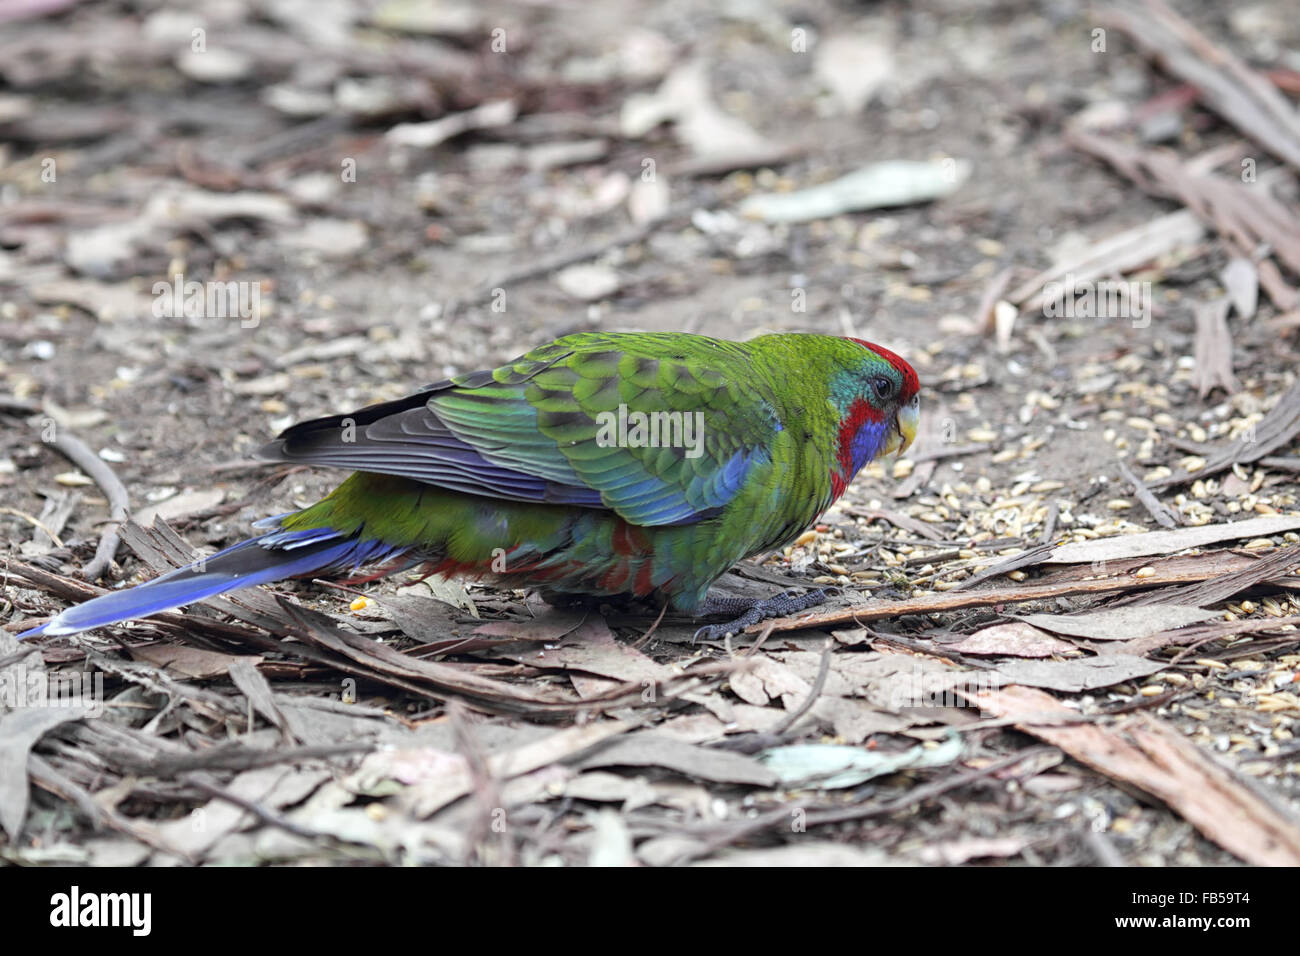 Juvenile Crimson Rosella (Platycercus elegans) sitting on the ground in Kennett River at the Great Ocean Road, Victoria, Austral Stock Photo